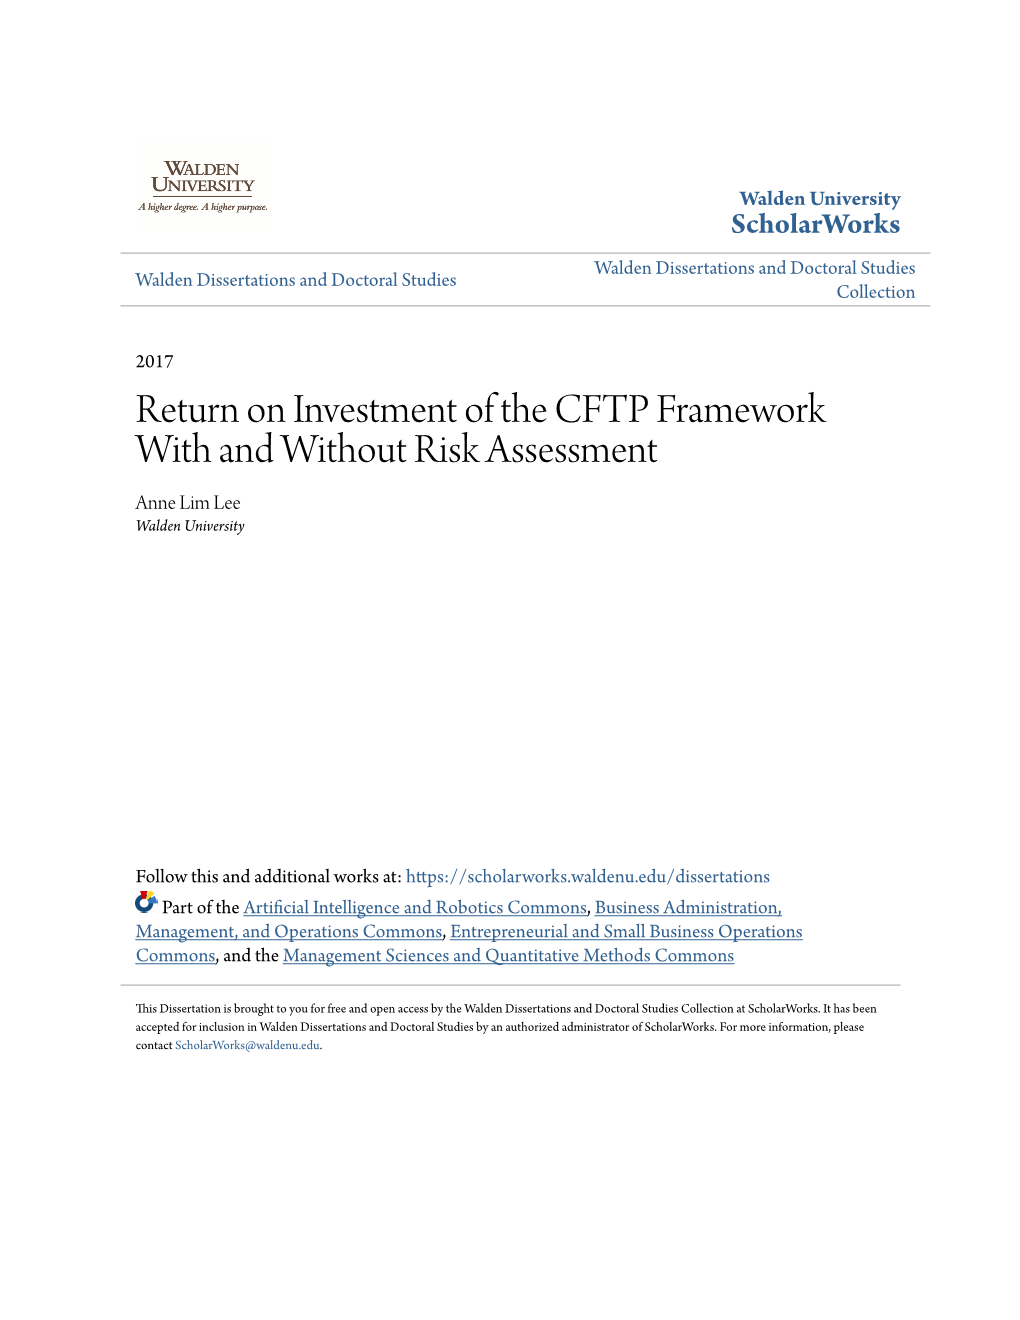 Return on Investment of the CFTP Framework with and Without Risk Assessment Anne Lim Lee Walden University